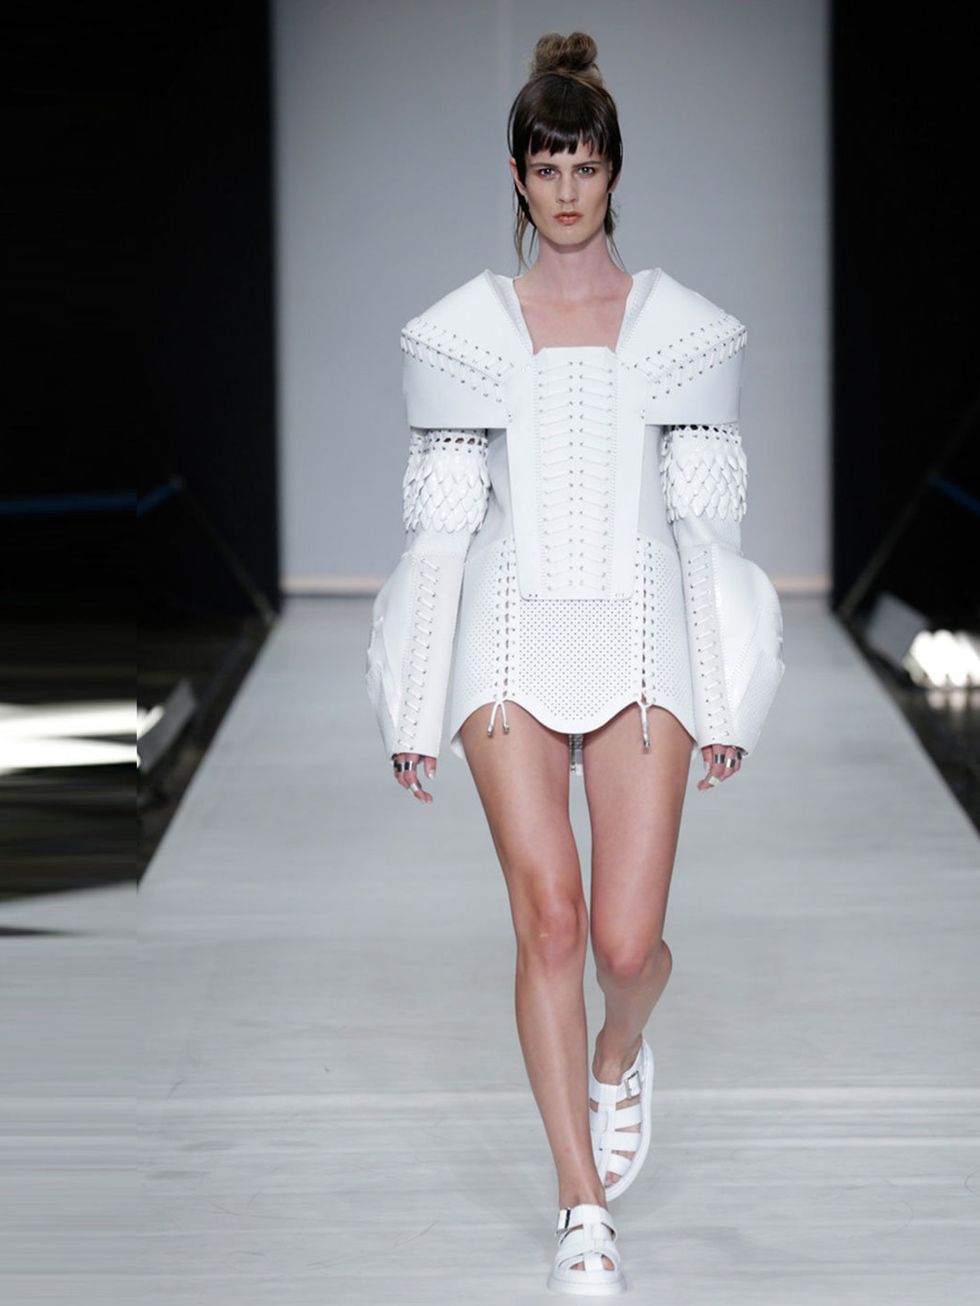 <p><a href="http://www.annesofiemadsen.com">Anne Sofie Madsen</a></p><p>Anne Sofie Madsen knows how to push boundaries. We loved her motorcycle pants and frilled white leather dresses, marveled at the origami-esq structure of the jackets and came to the c